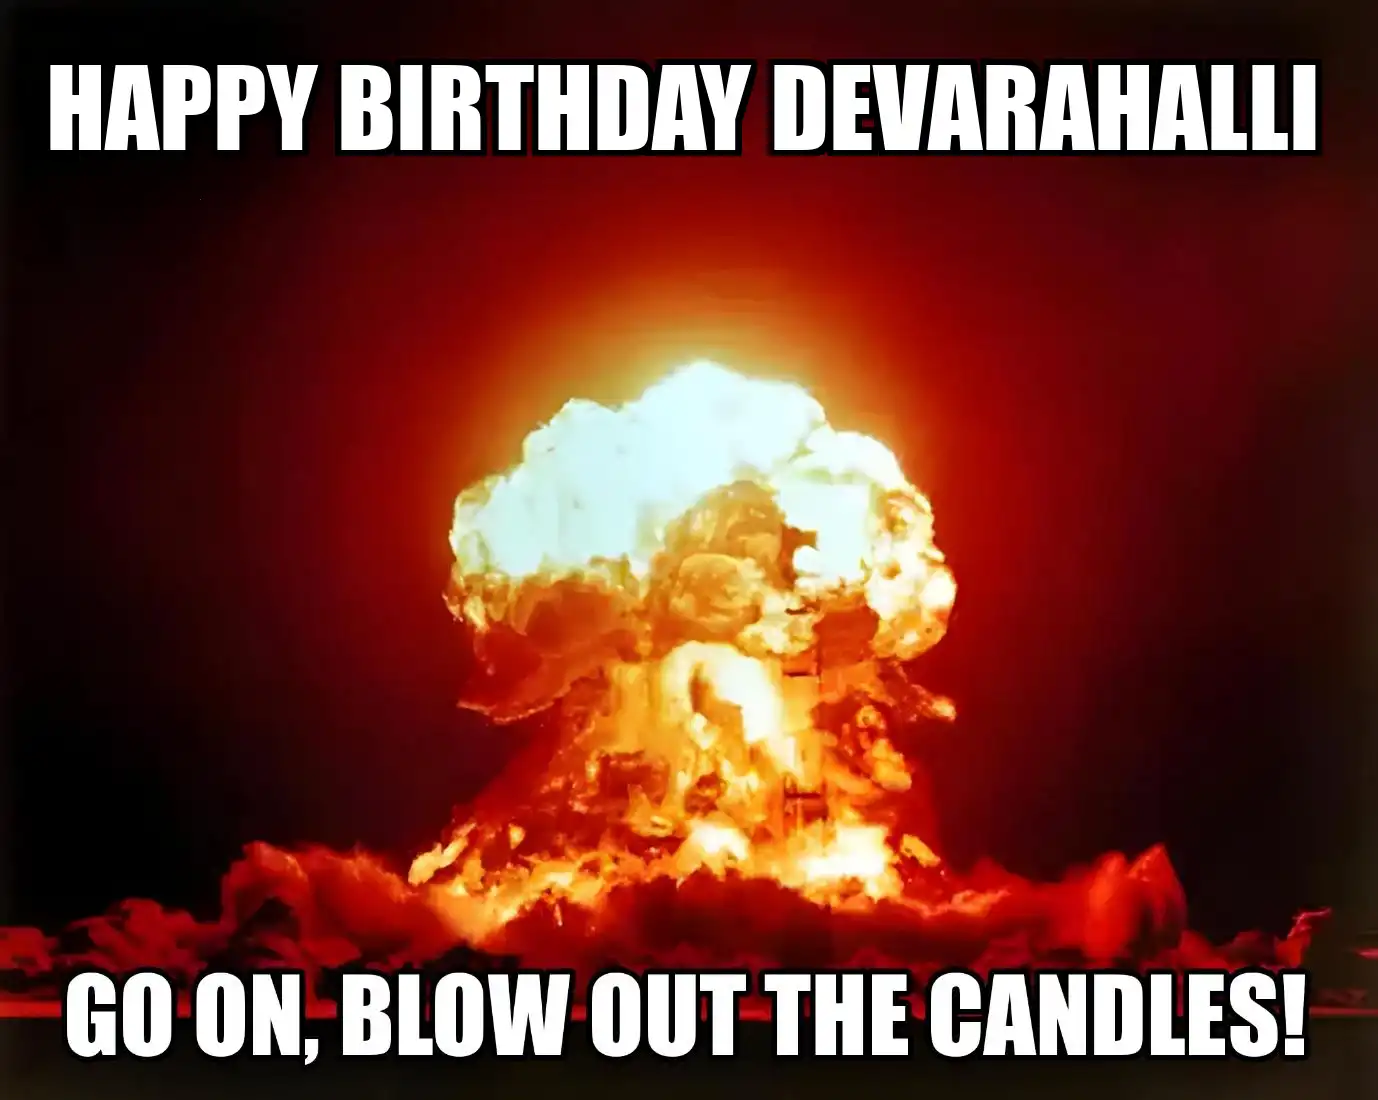 Happy Birthday Devarahalli Go On Blow Out The Candles Meme